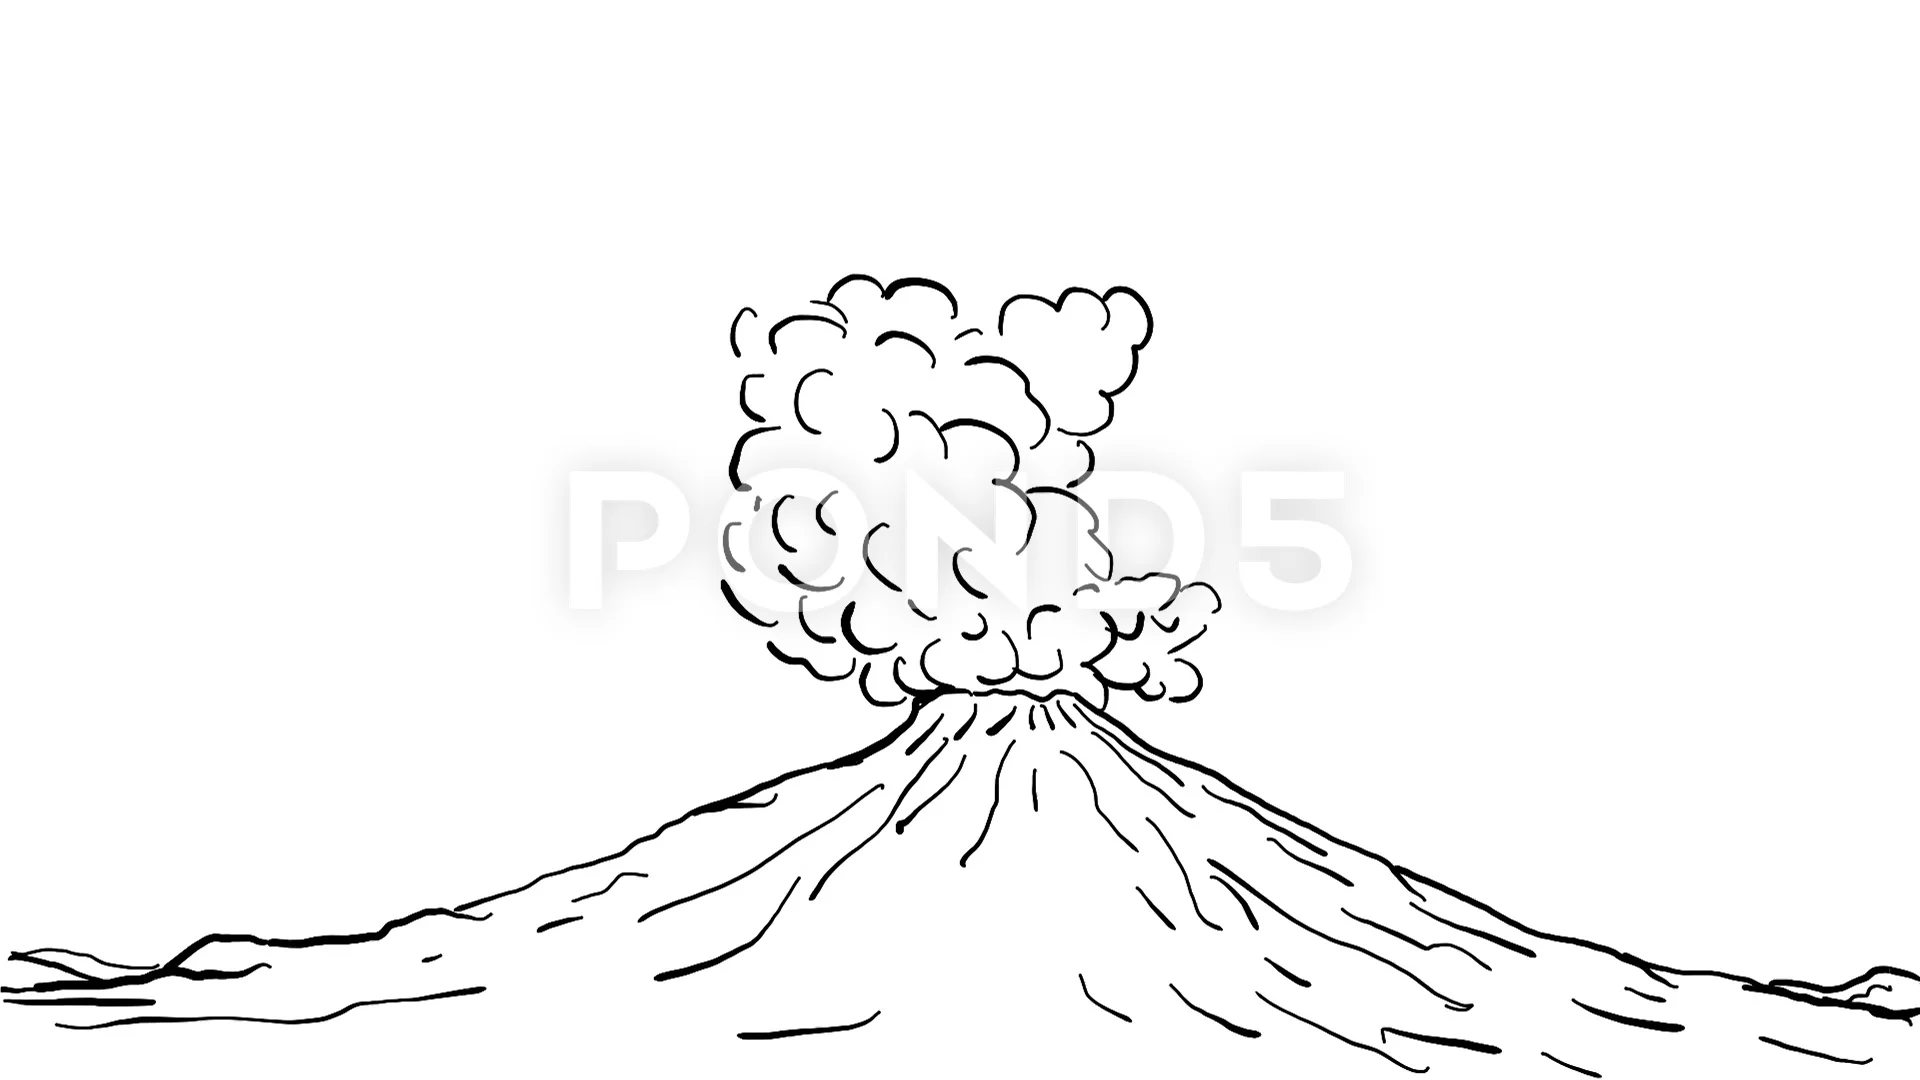 Volcano drawing | Natural disaster drawing | Volcanic eruption drawing -  YouTube